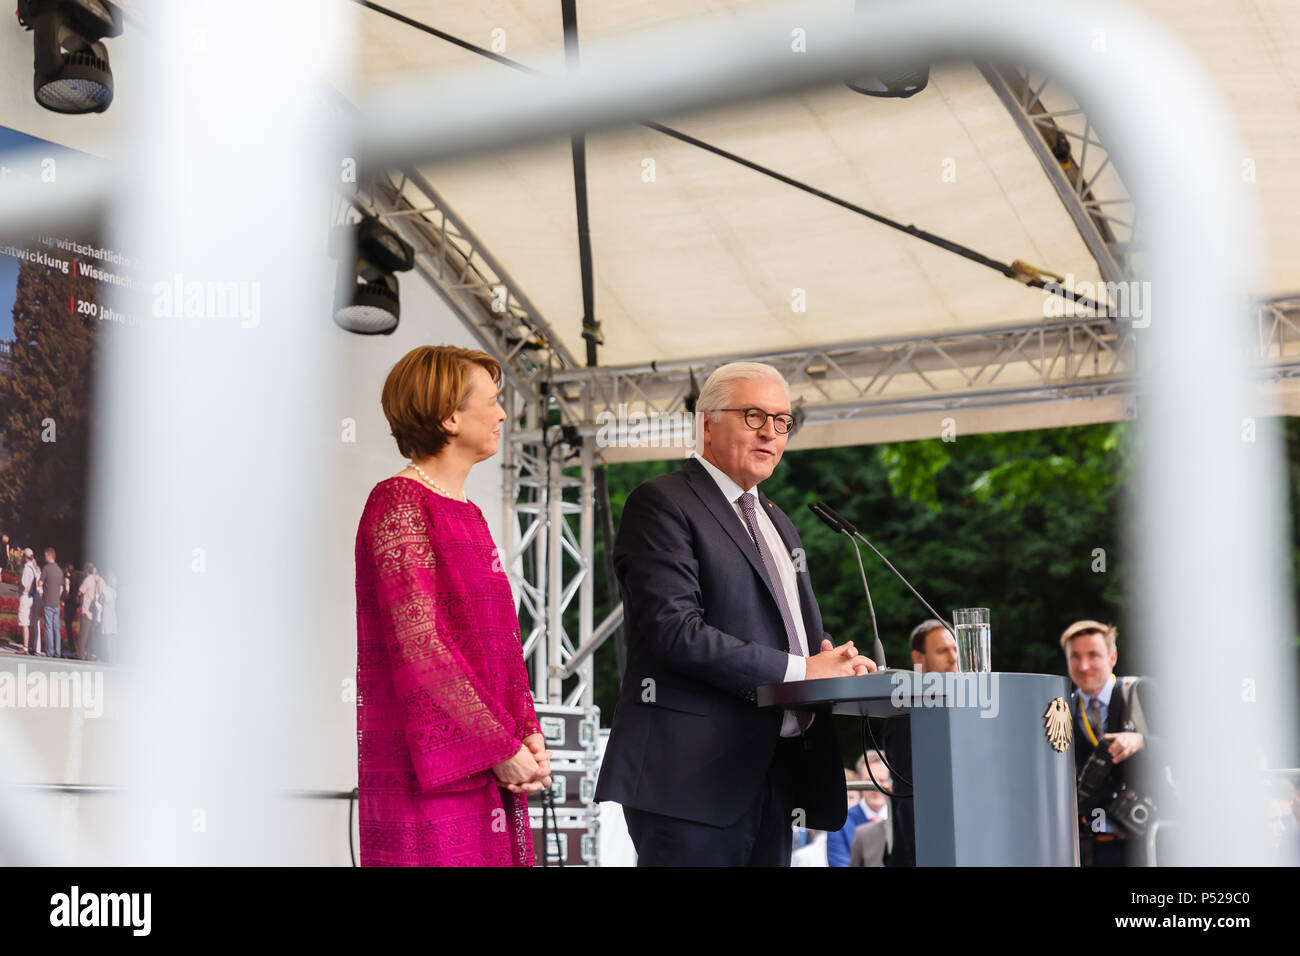 Bonn, Germany - June 24, 2018: The Federal President of Germany, Walter Steinmeyer, and his wife representing themselves to the public on an open house day at the Villa Hammerschmidt. Credit: Christian Müller/Alamy Live News Stock Photo